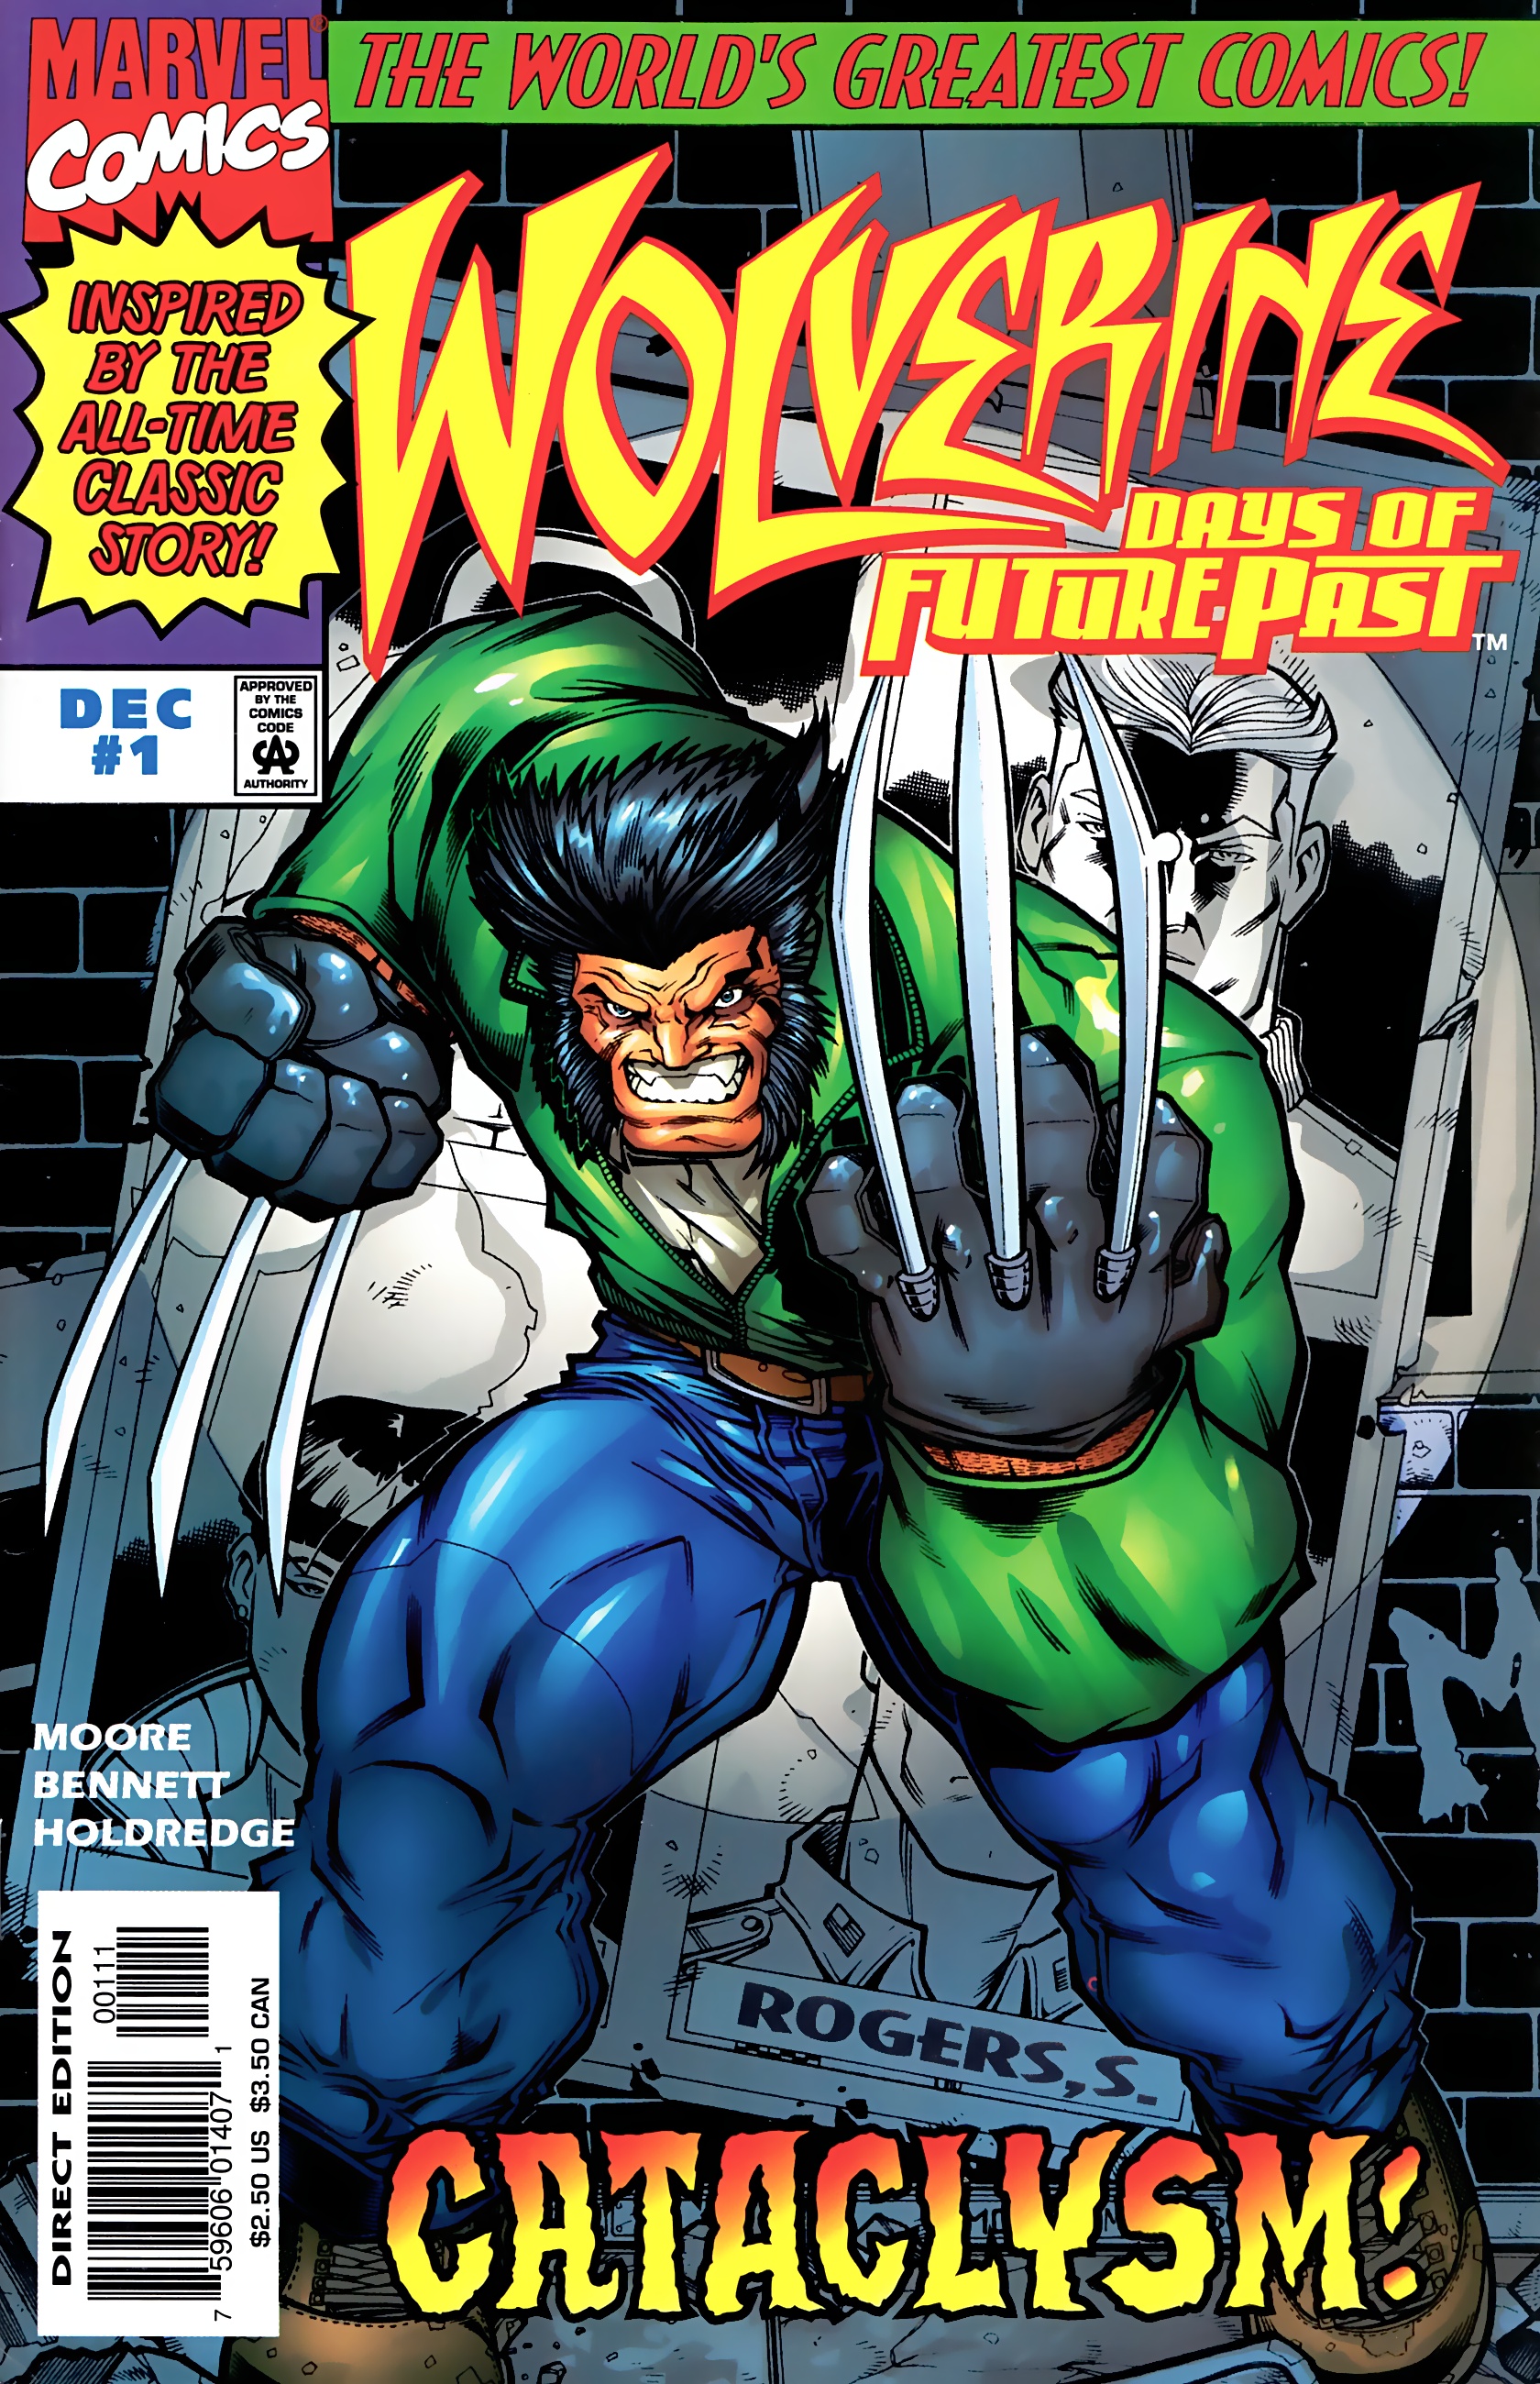 Read online Wolverine: Days of Future Past comic -  Issue #1 - 1